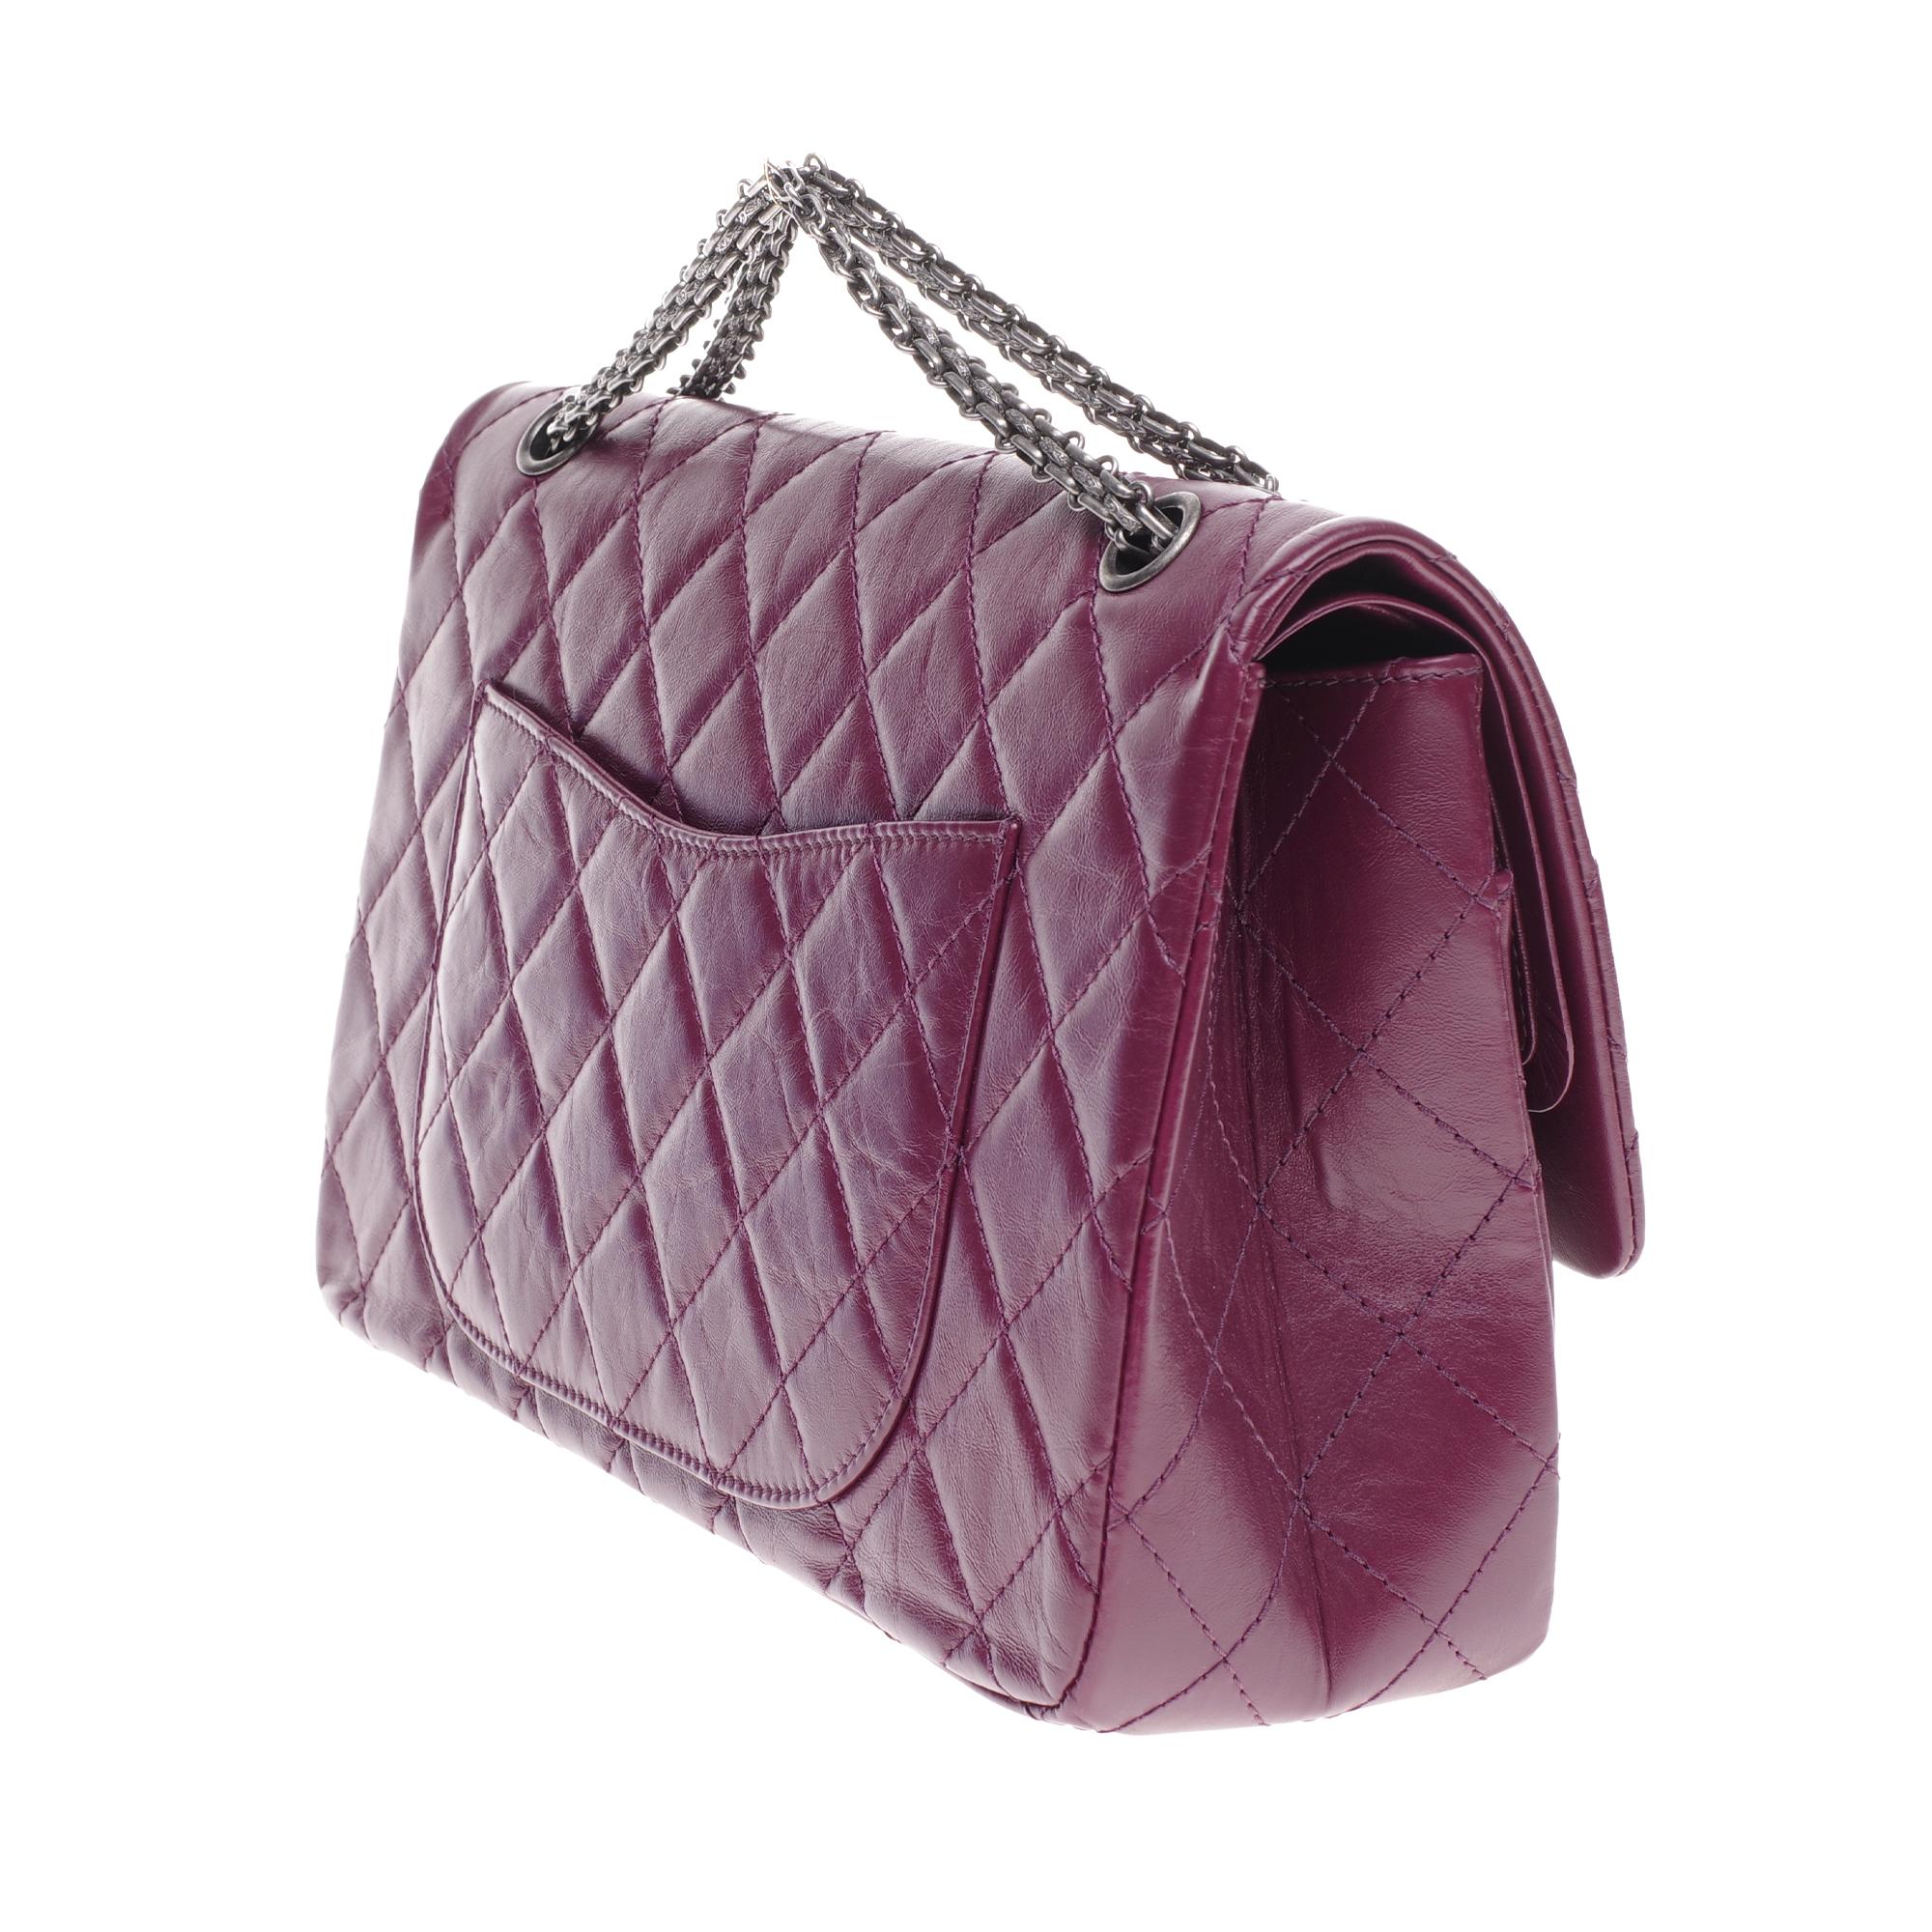 Women's Amazing Chanel 2.55 Reissue handbag in plum quilted leather